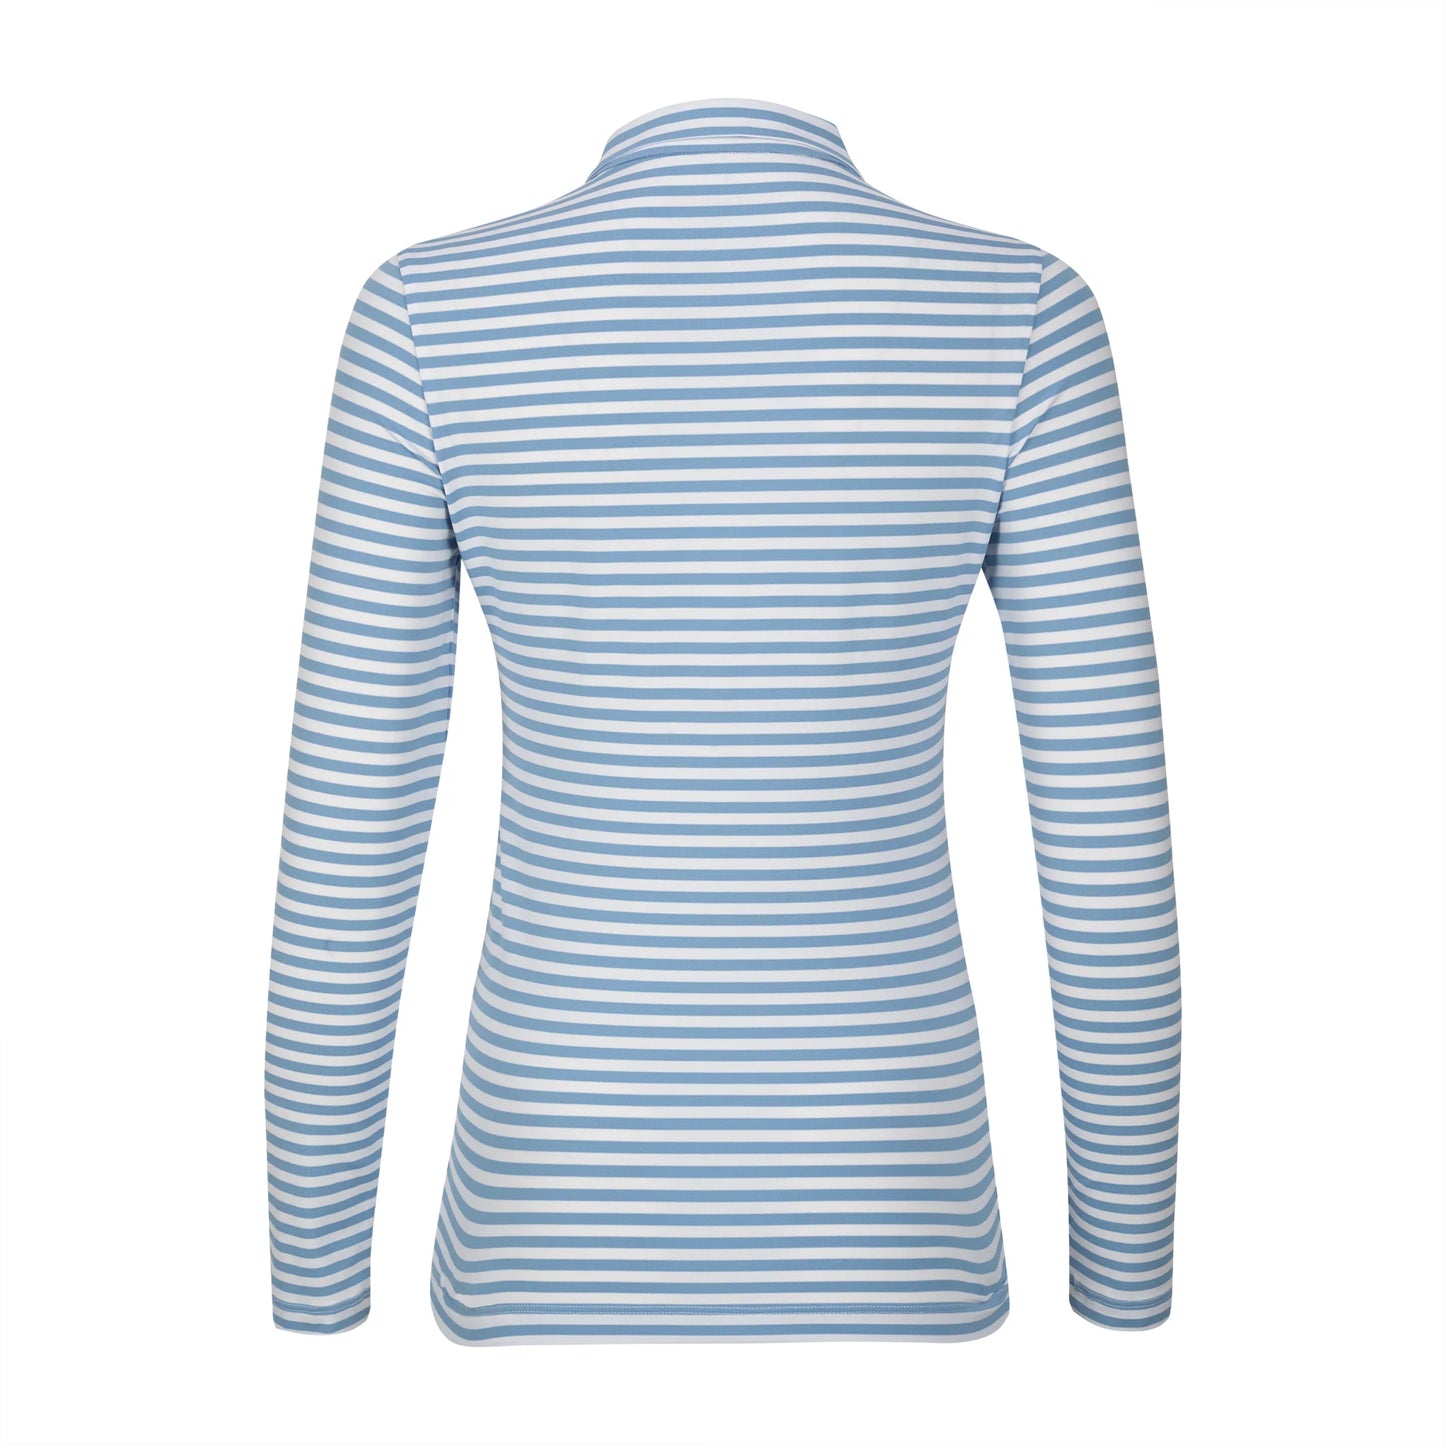 The Malak Striped Top - Mirage